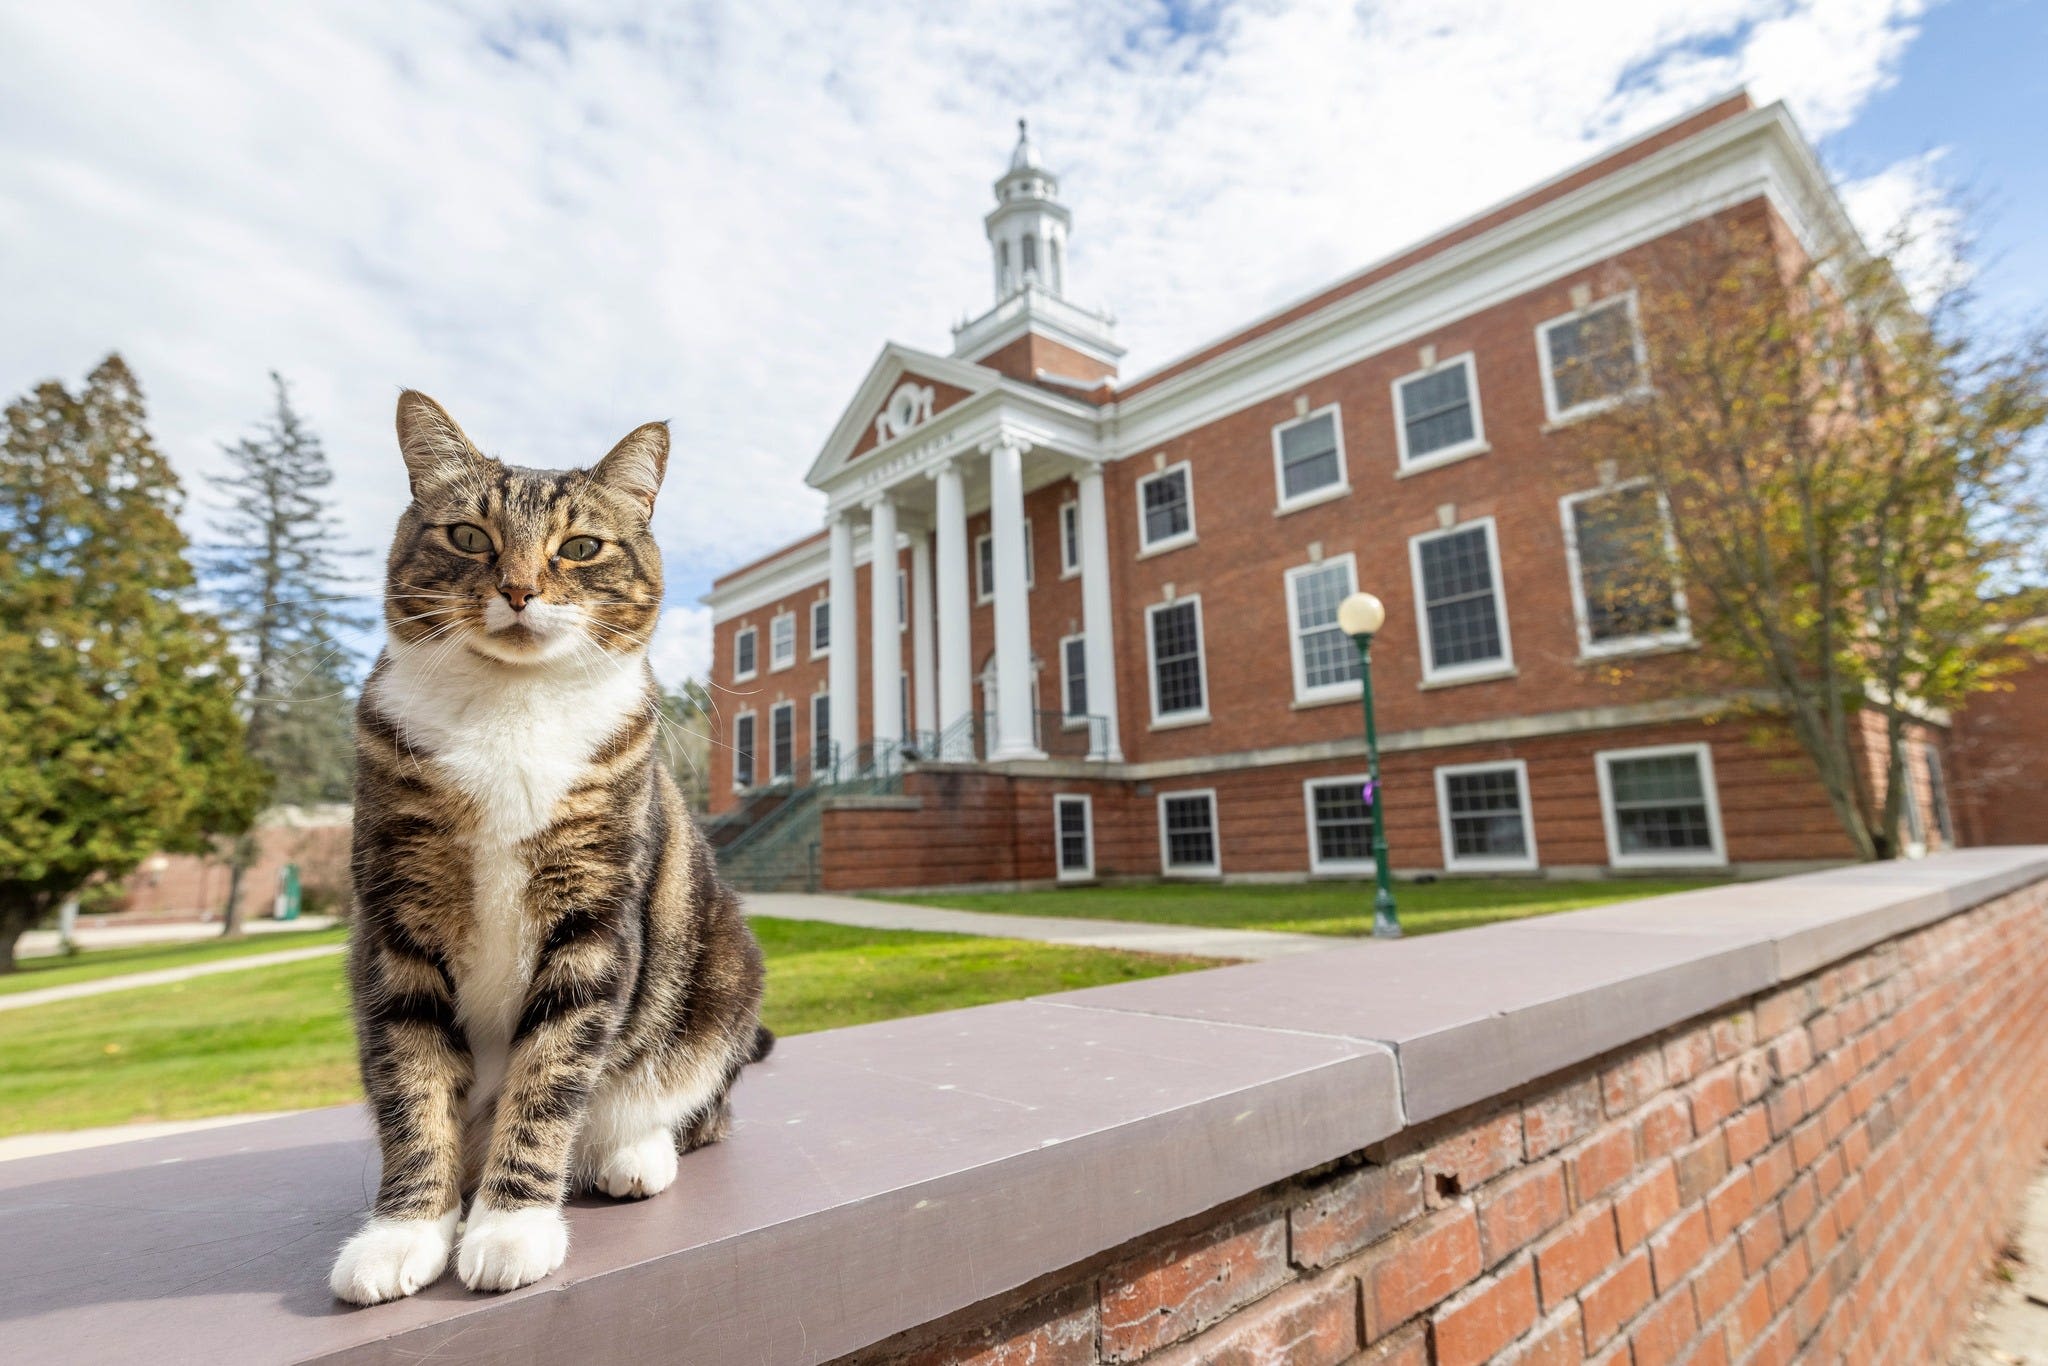 Max the cat receives honorary doctorate in 'litter-ature’ from Vermont university